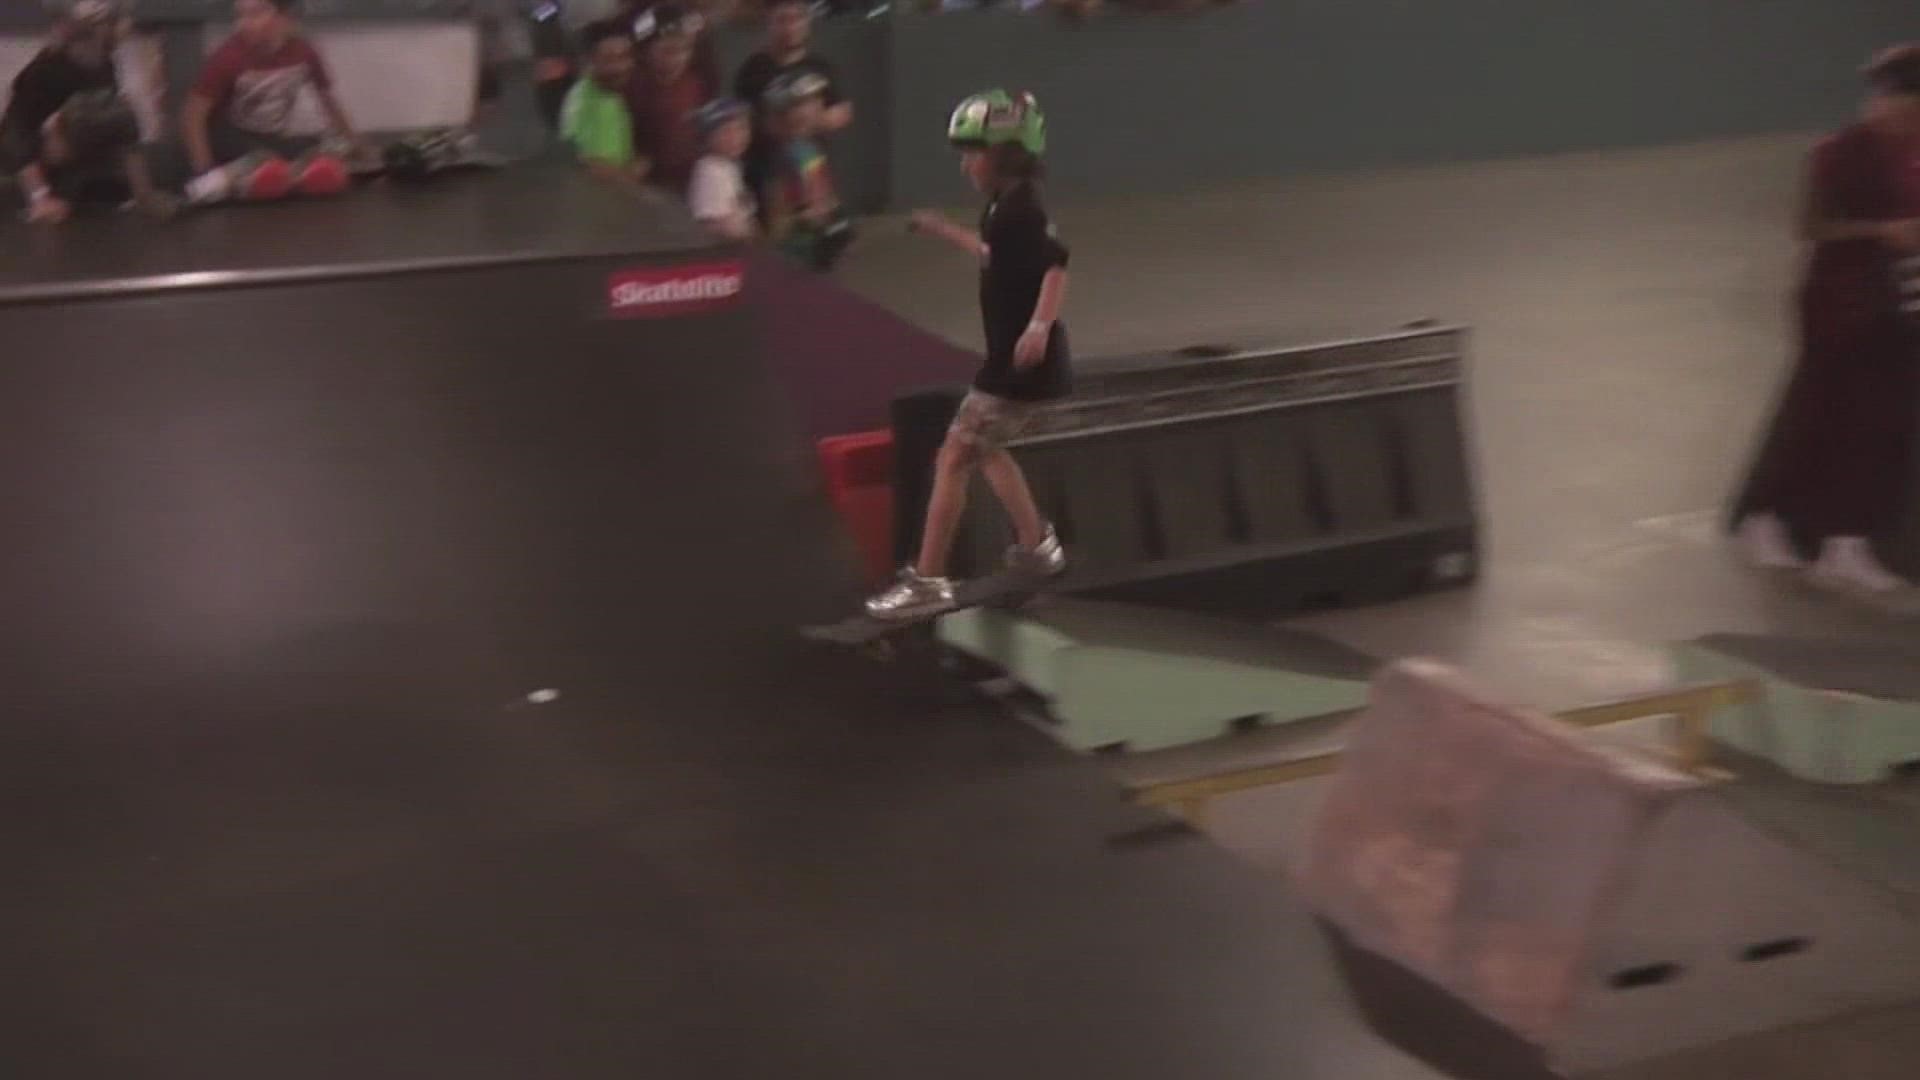 Skate Like A Girl hosts Wheels of Fortune this weekend